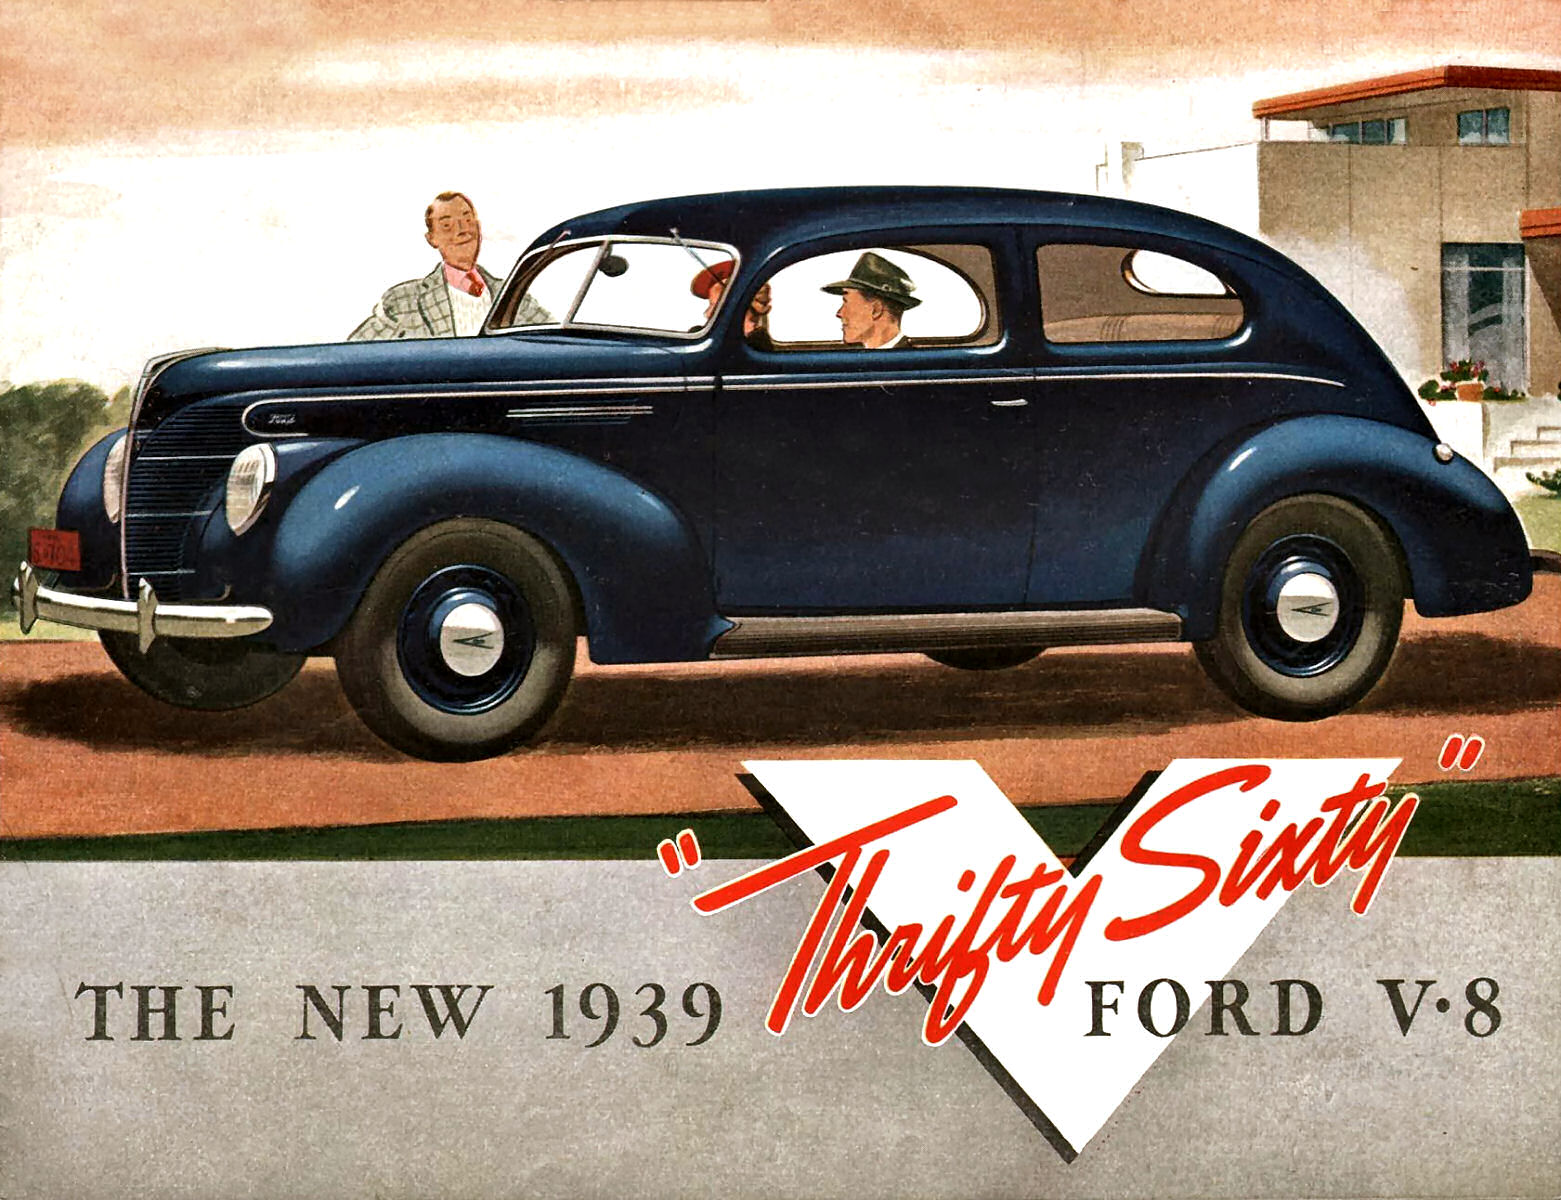 1939 Ford Thrifty Sixty Foldout-01